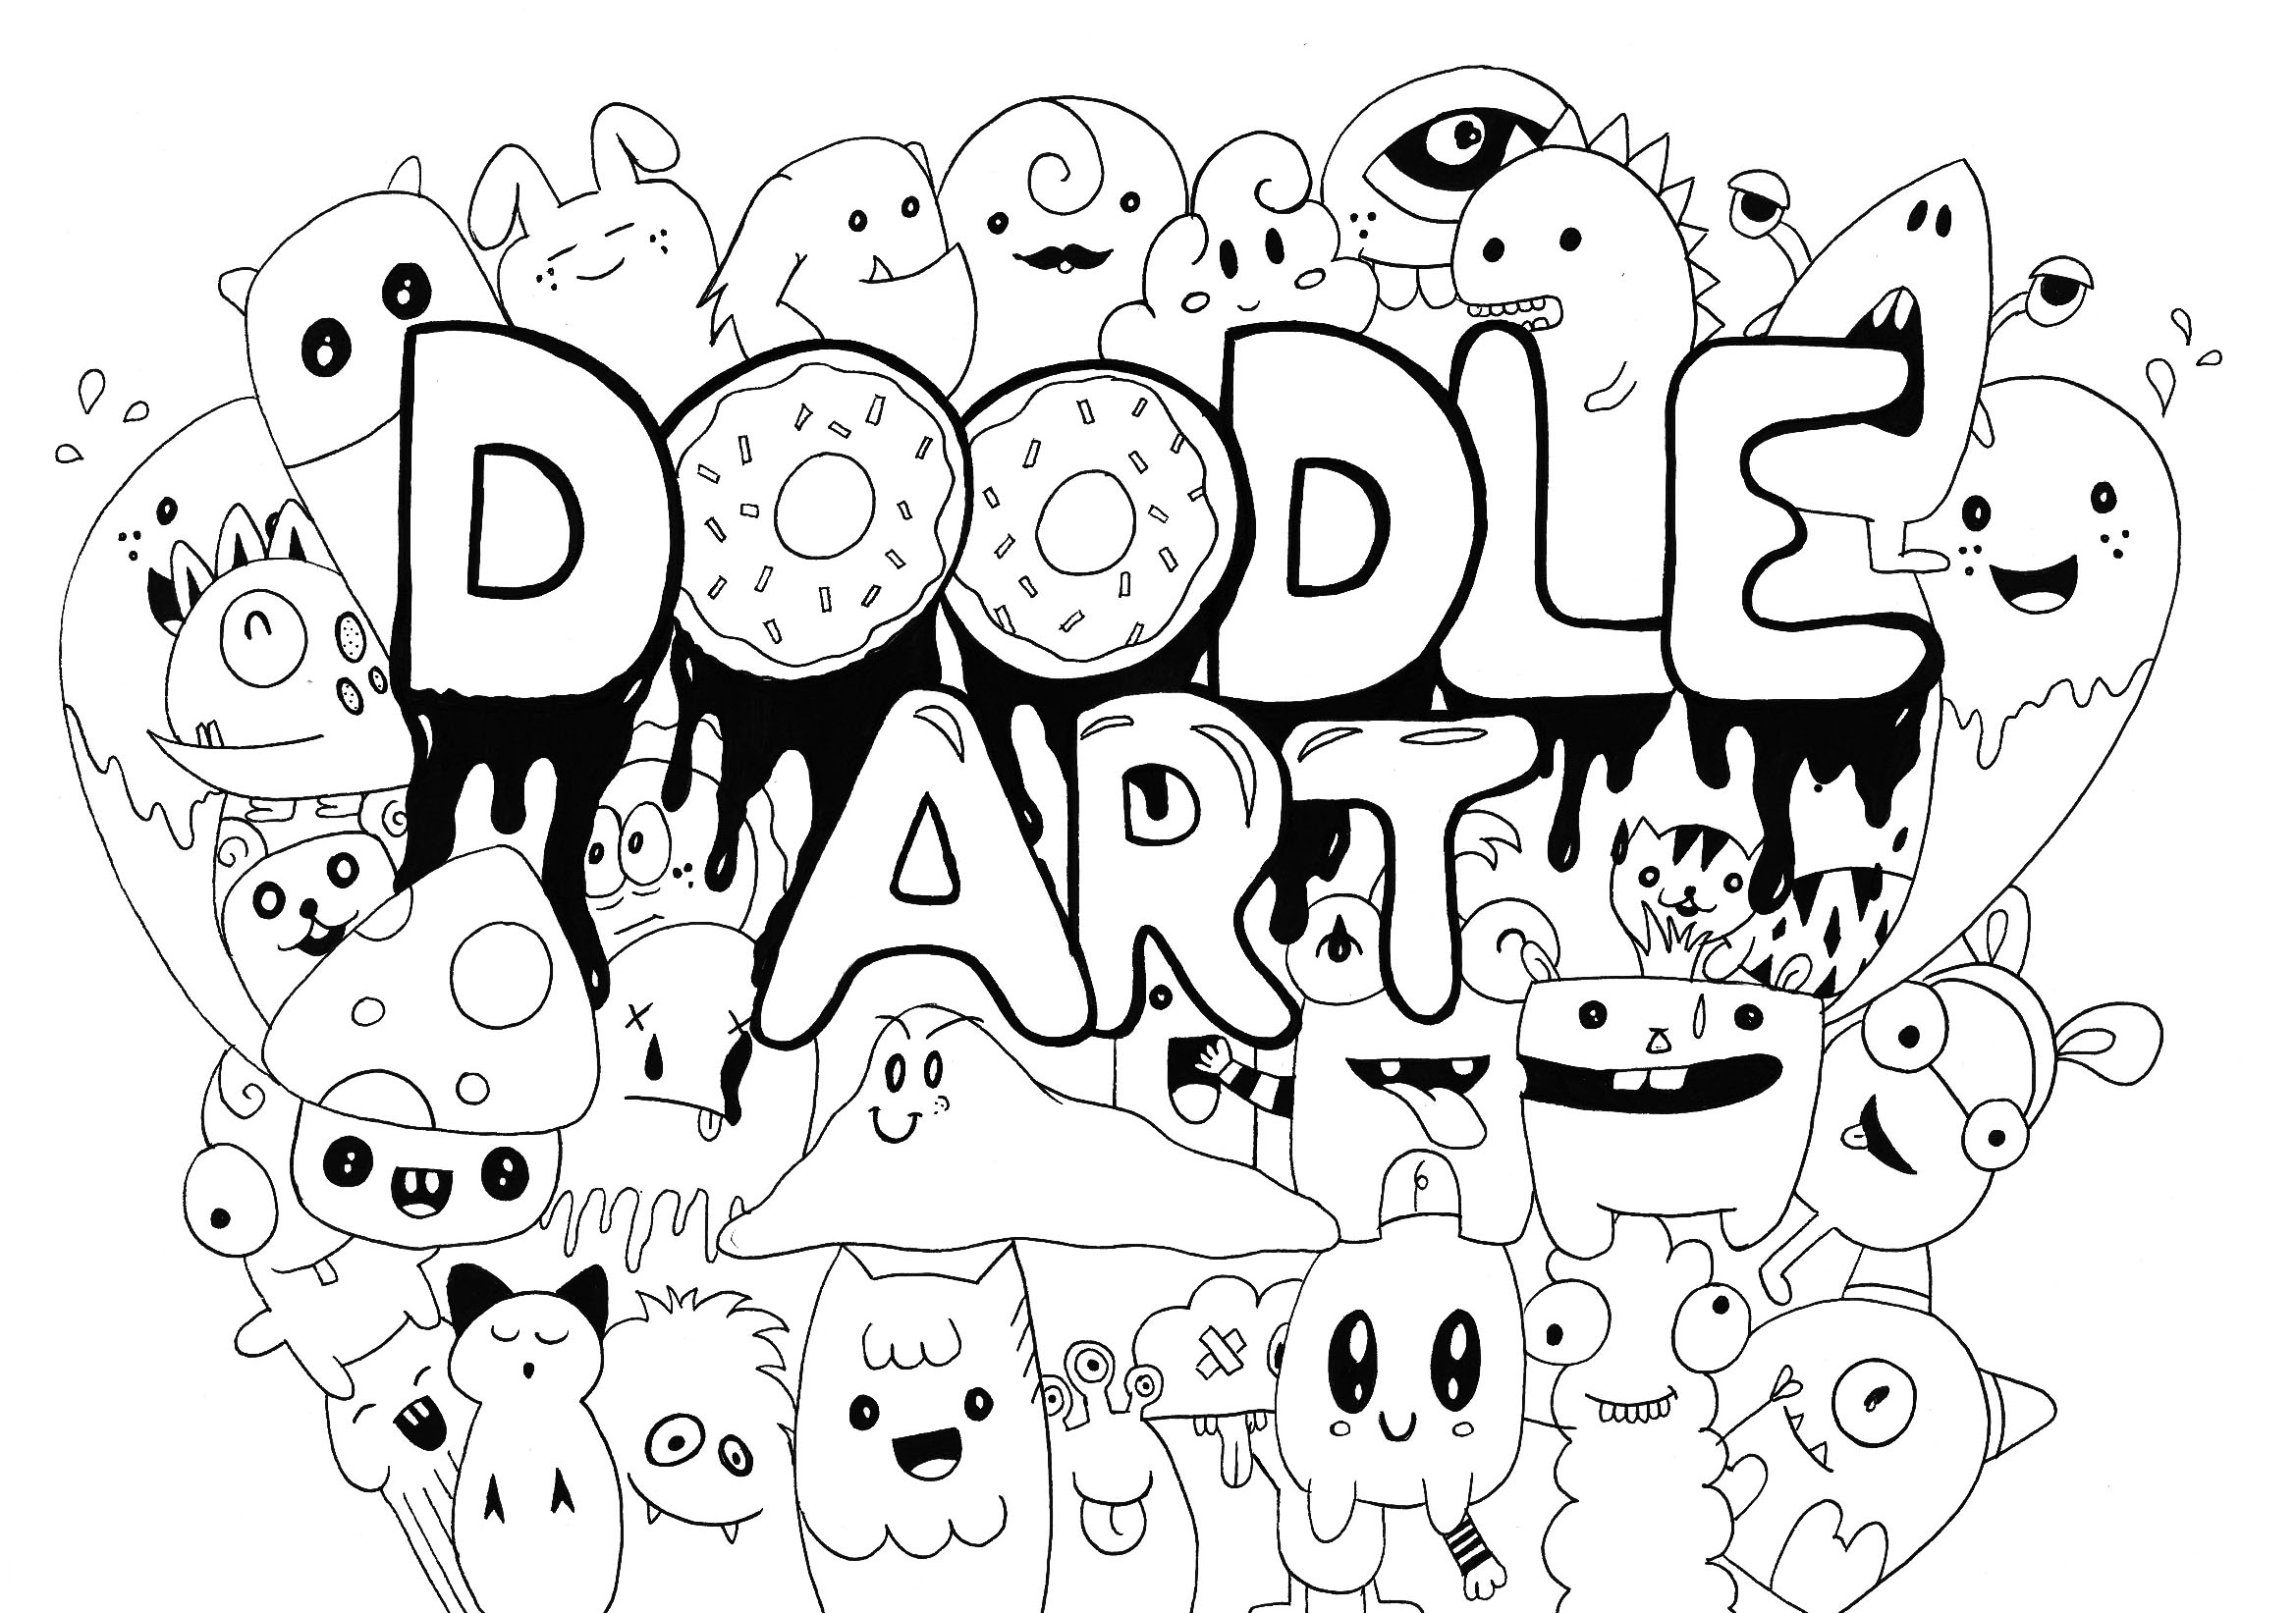 Kawaii characters, gathered in a coloring page entitled 'Doodle Art', Artist : Rachel